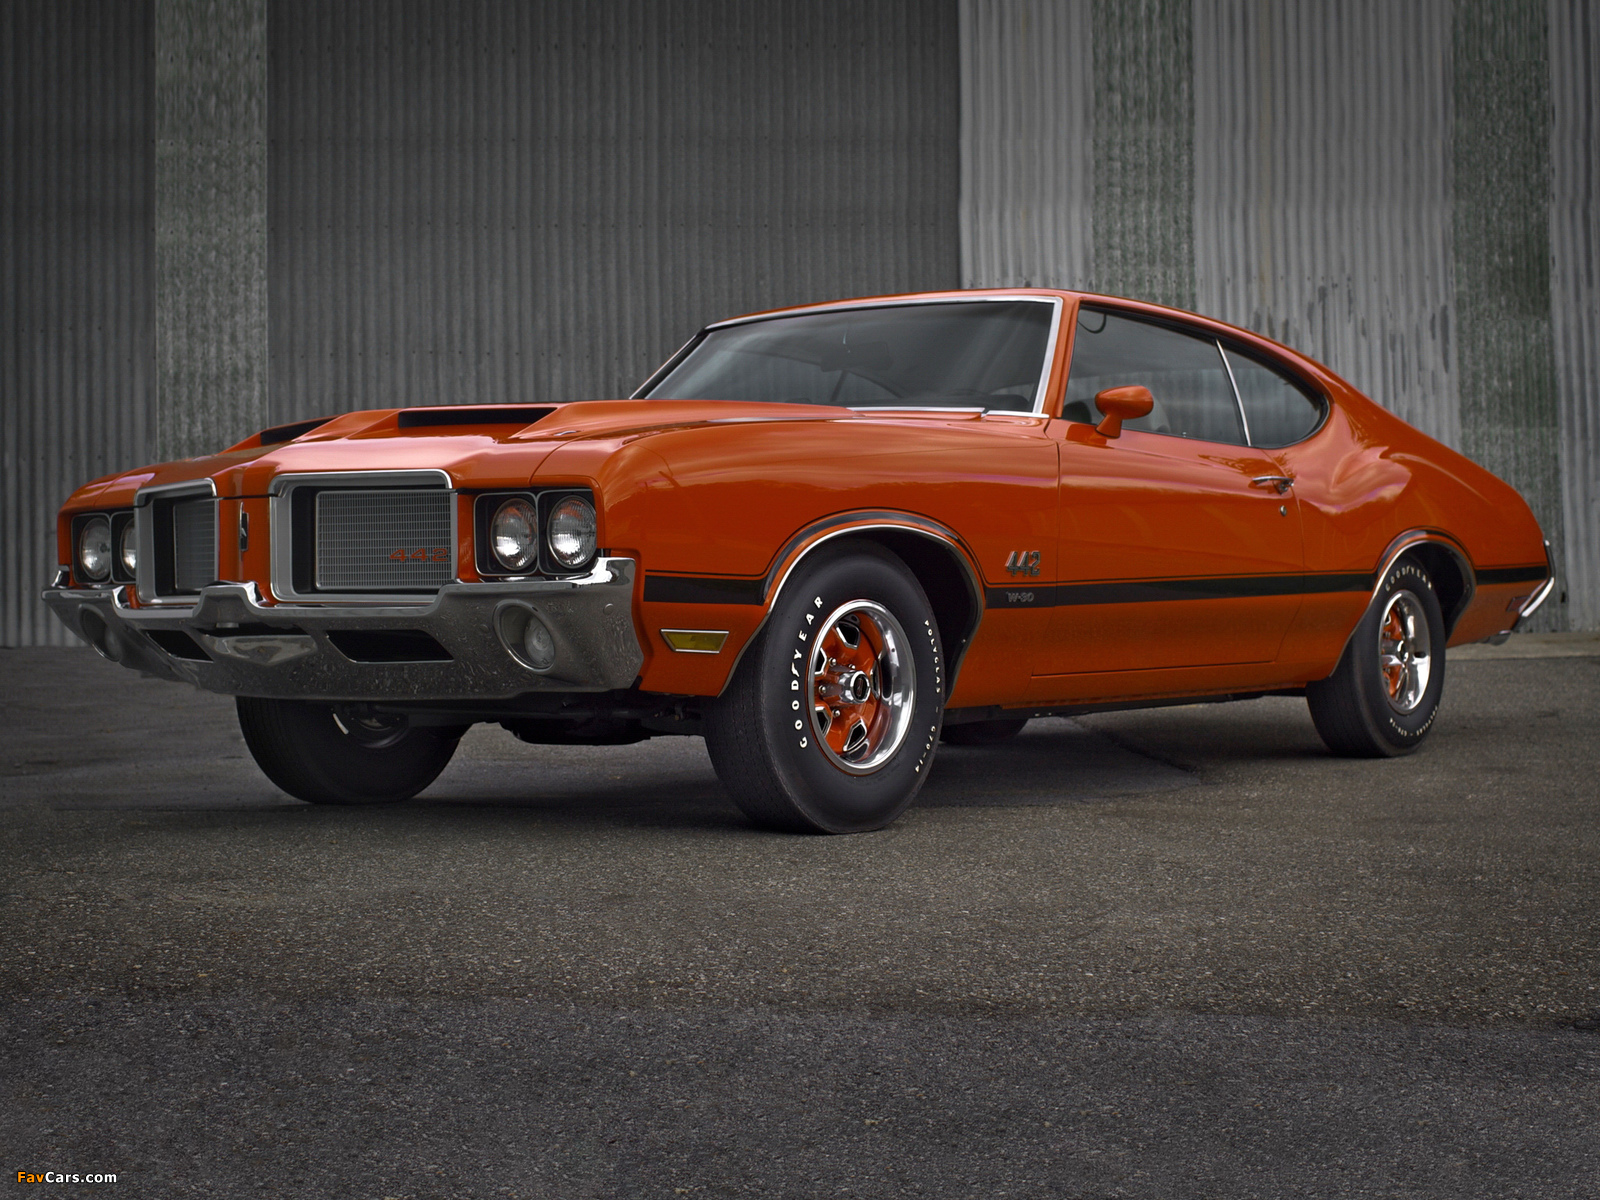 Images of Oldsmobile Cutlass 442 W-30 Hardtop Coupe 1972 (1600 x 1200)